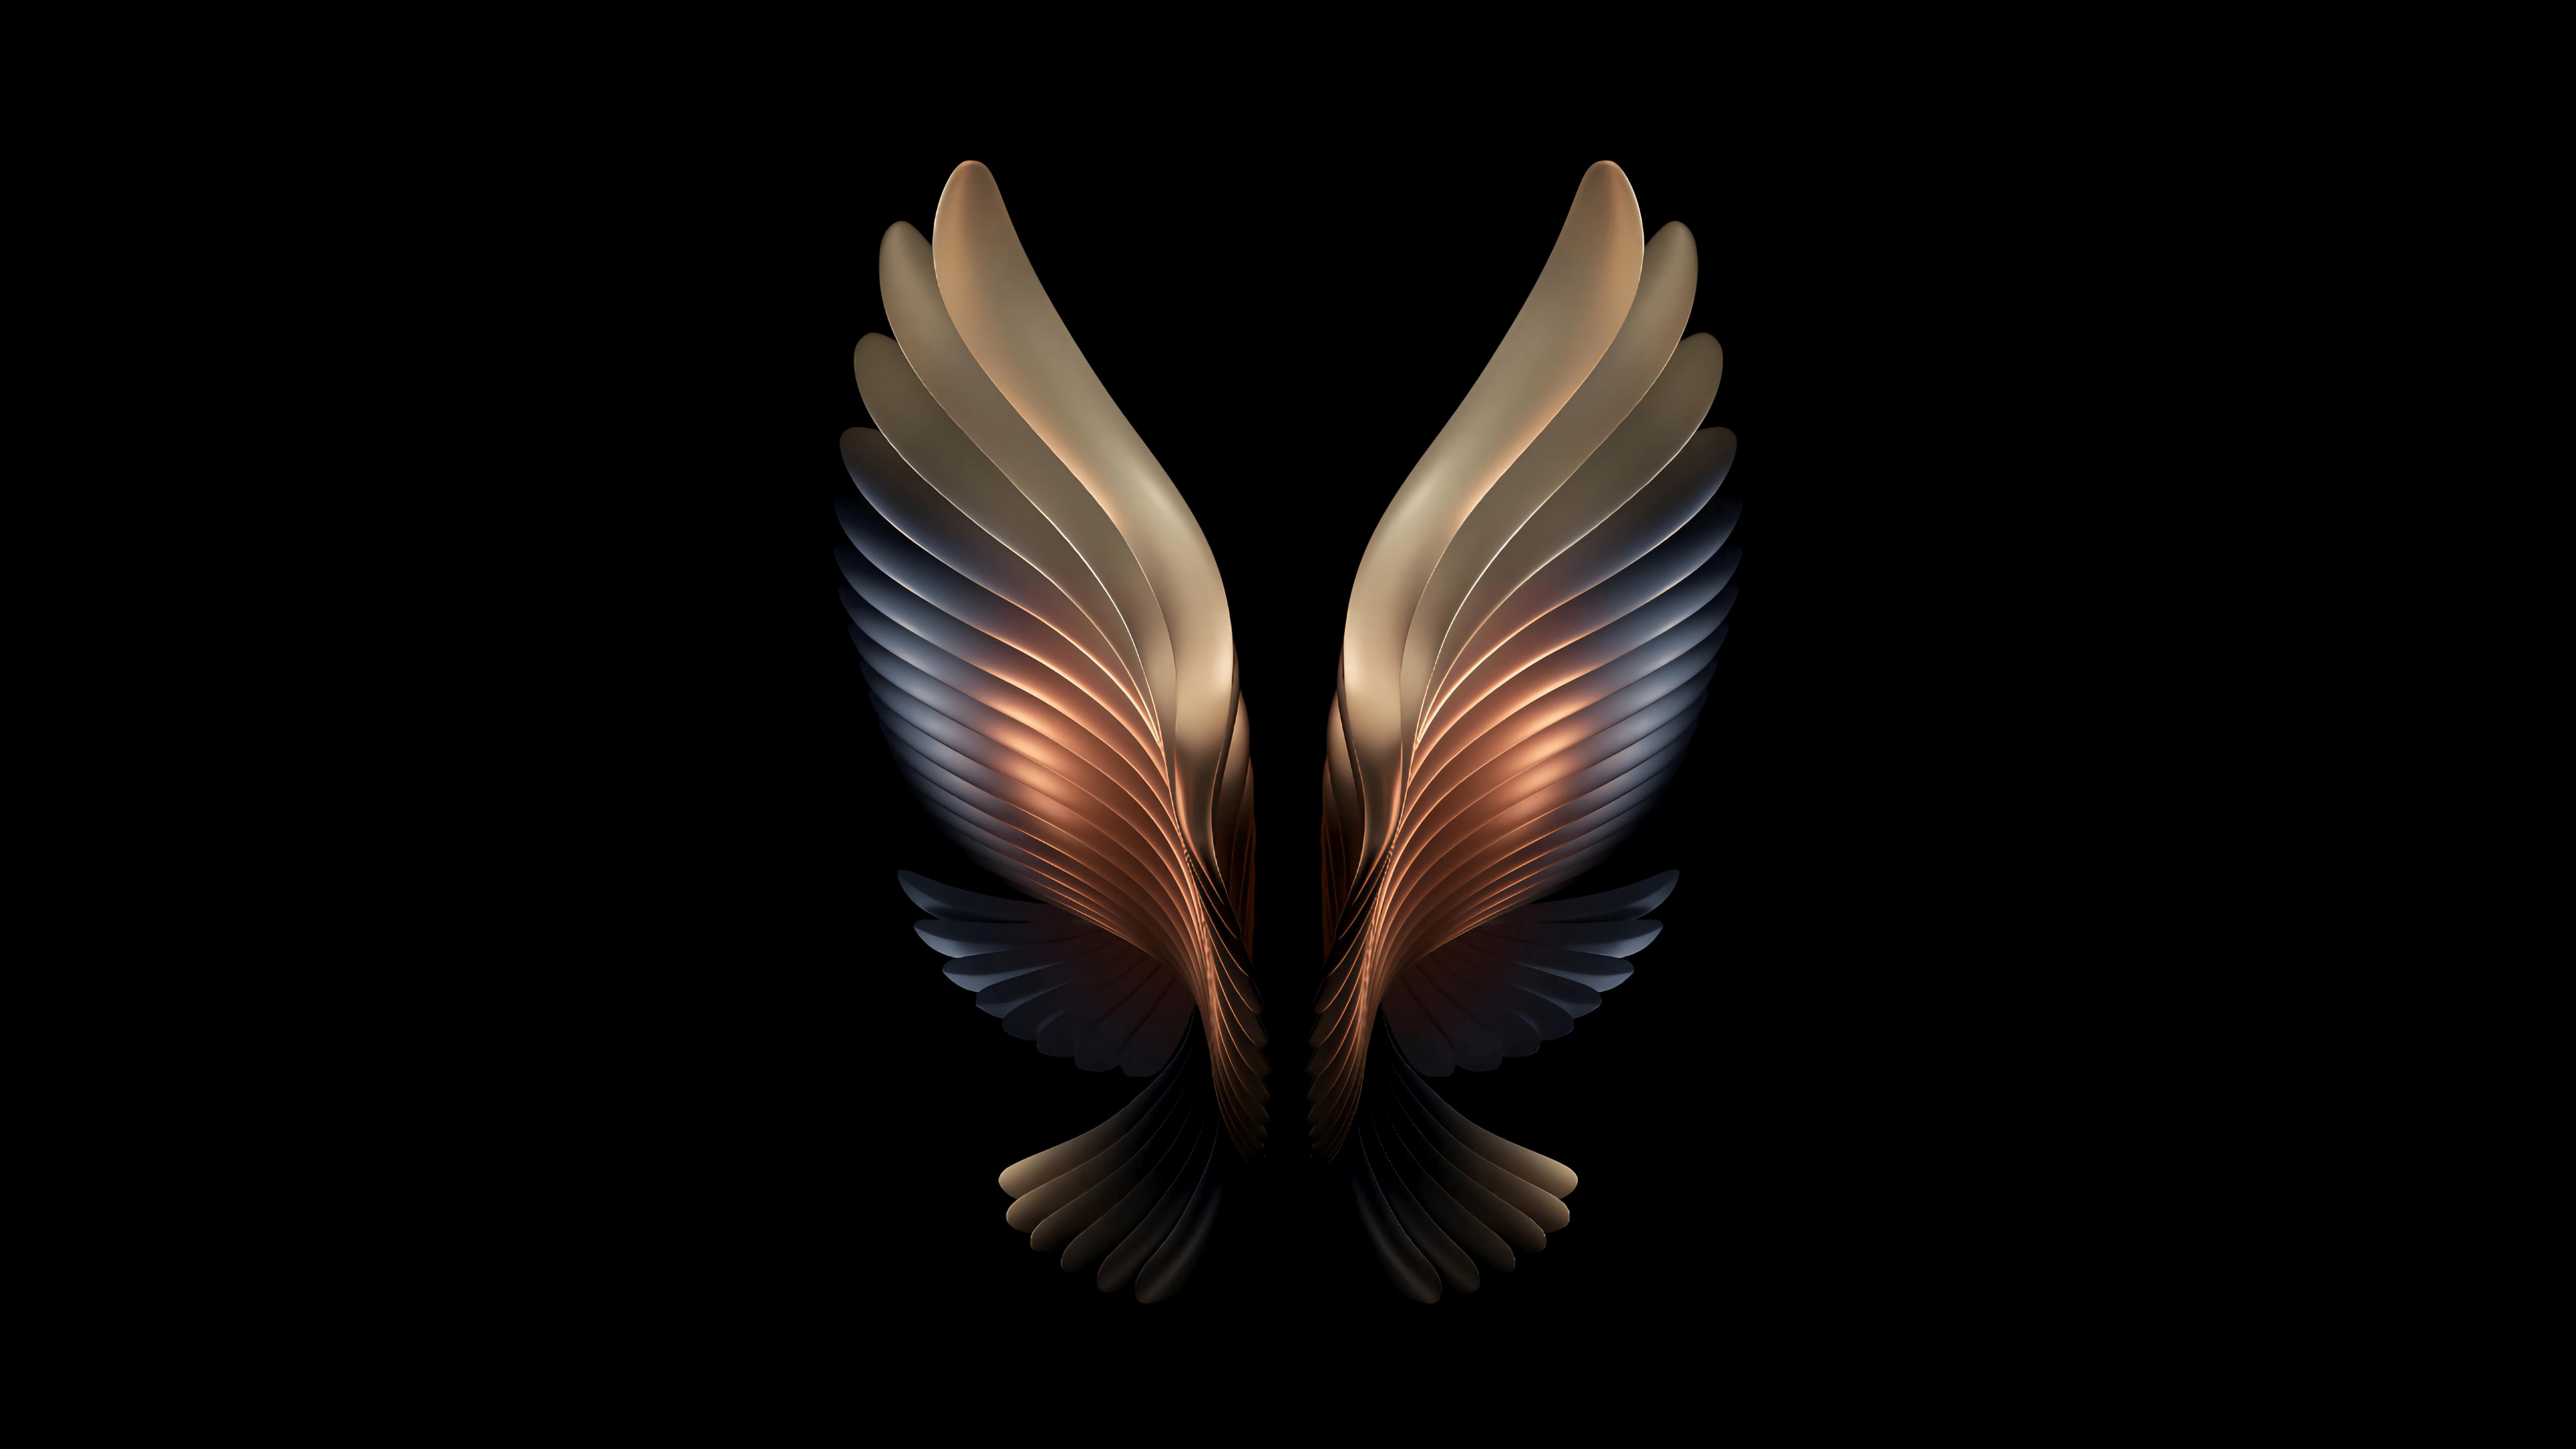 Two large golden wings on a black background - Wings